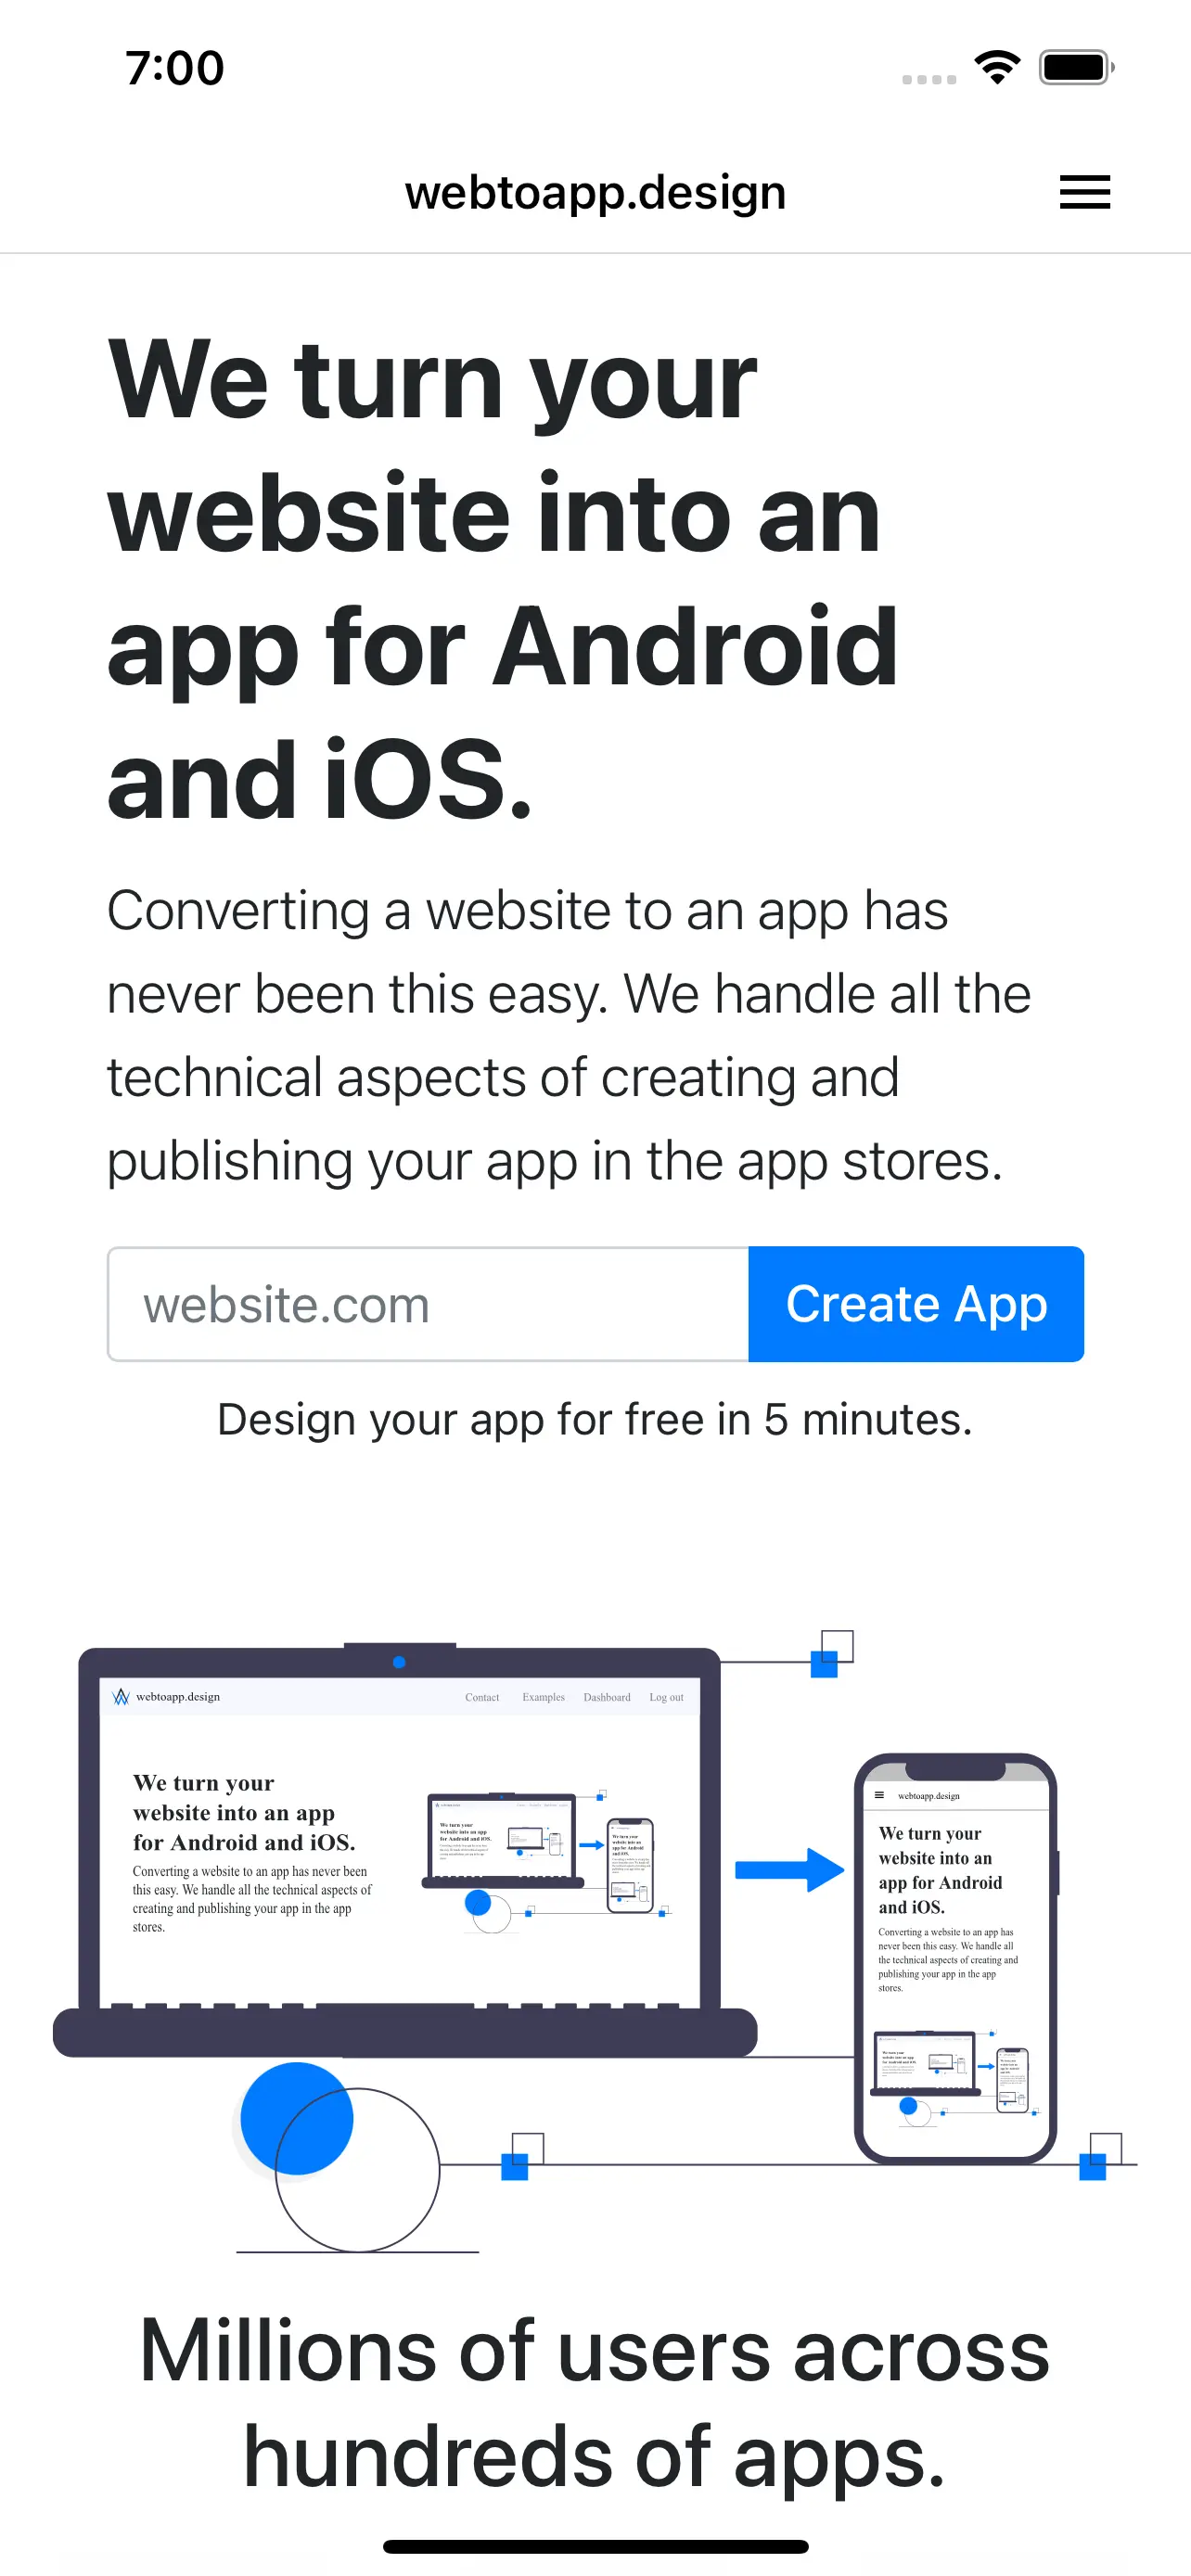 A screenshot of the webtoapp.design mobile app created by converting their website into an app